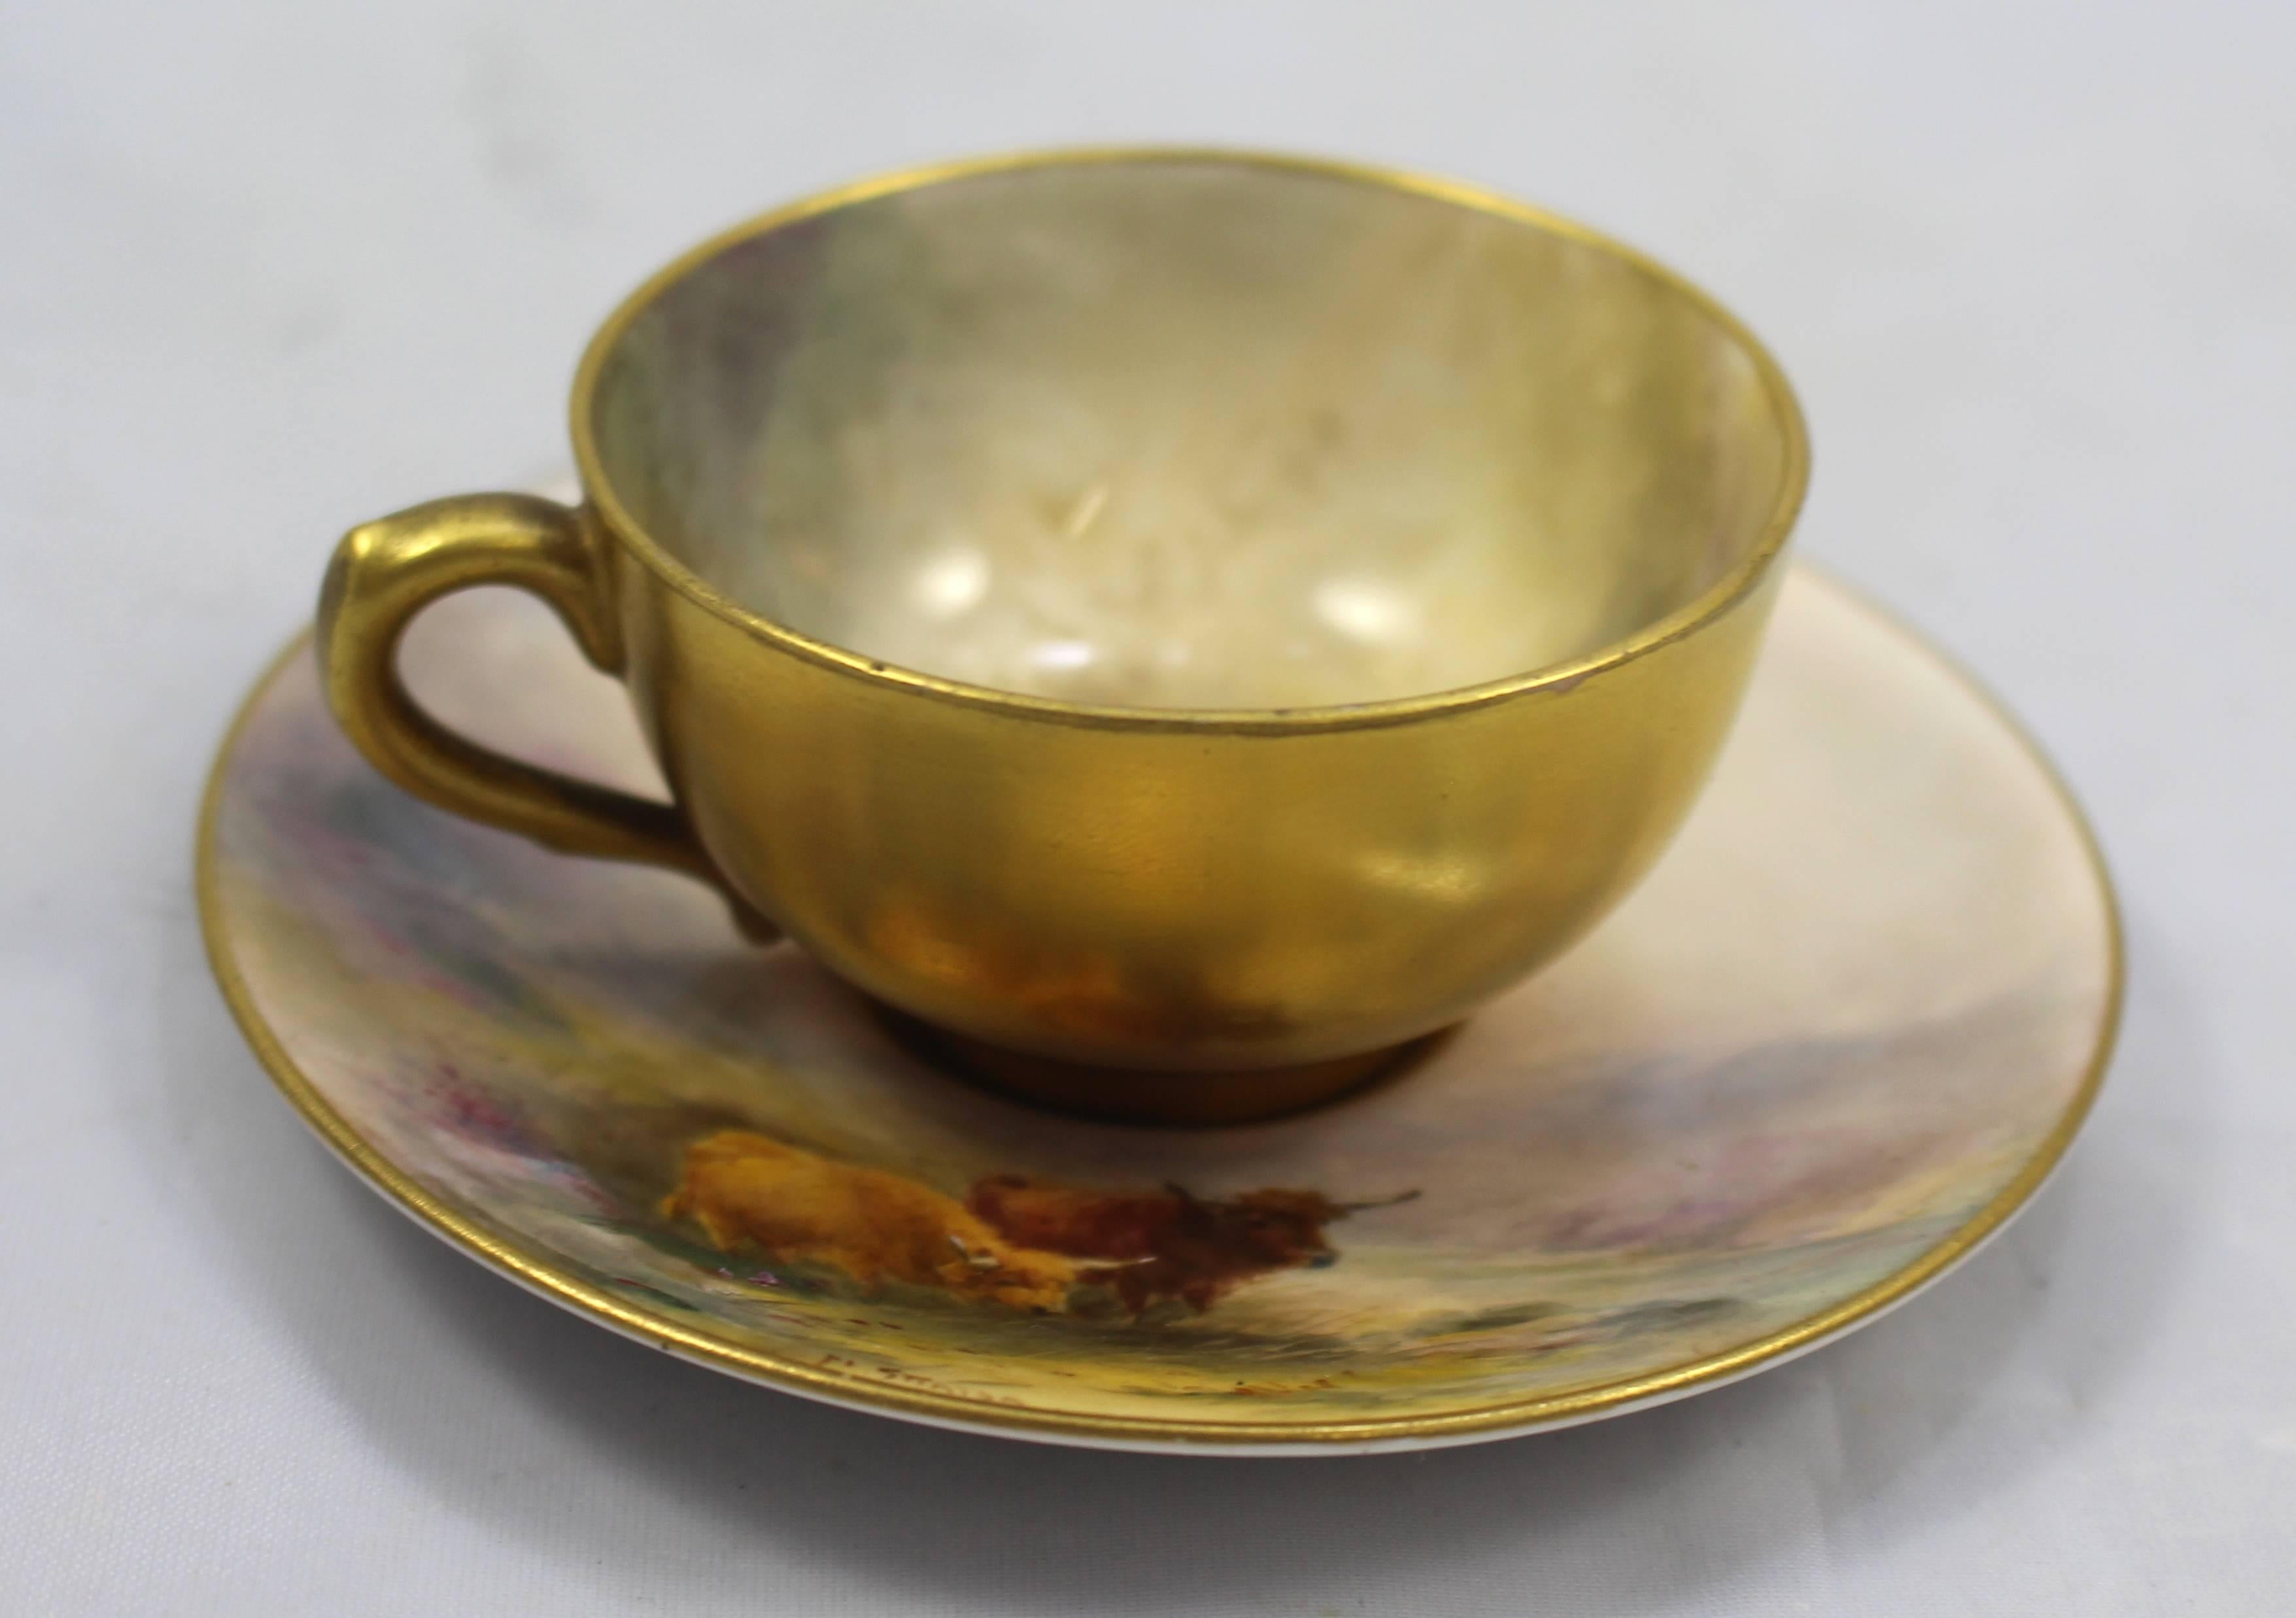 Manufacturer: Royal Worcester, made in England.
Artist: Harry Stinton, signed.
Date: 1922.
Tea cup height: 3.5 cm / 1 1/4 in.
Saucer diameter: 9.5 cm / 3 3/4 in.
Subject hand-painted cattle.
Back stamp: Royal Worcester, first